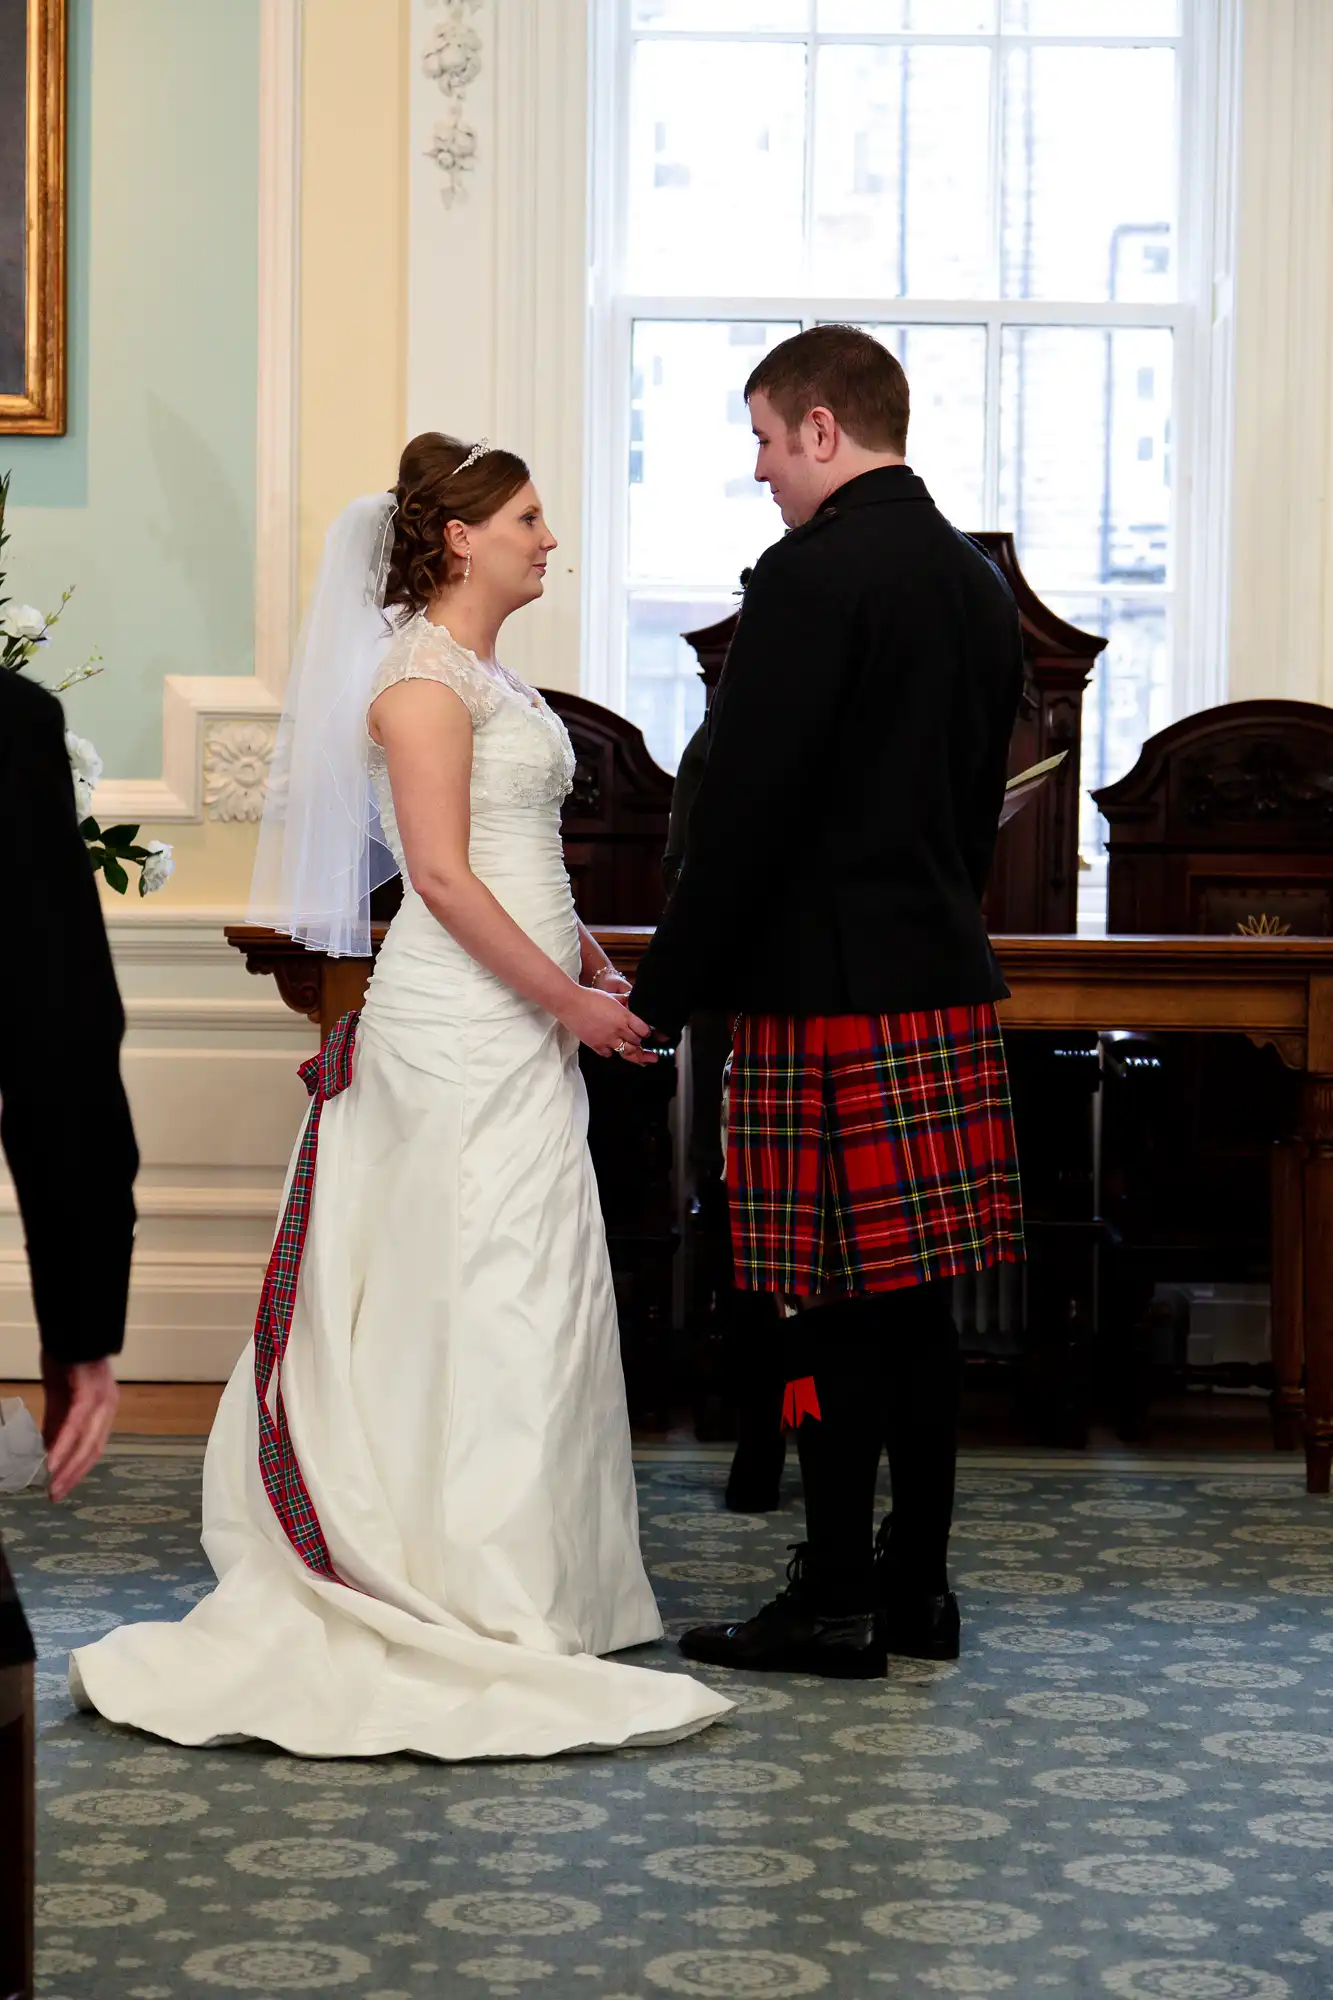 A bride in a white gown and a groom in a tartan kilt hold hands at their wedding ceremony inside a room with traditional decor.